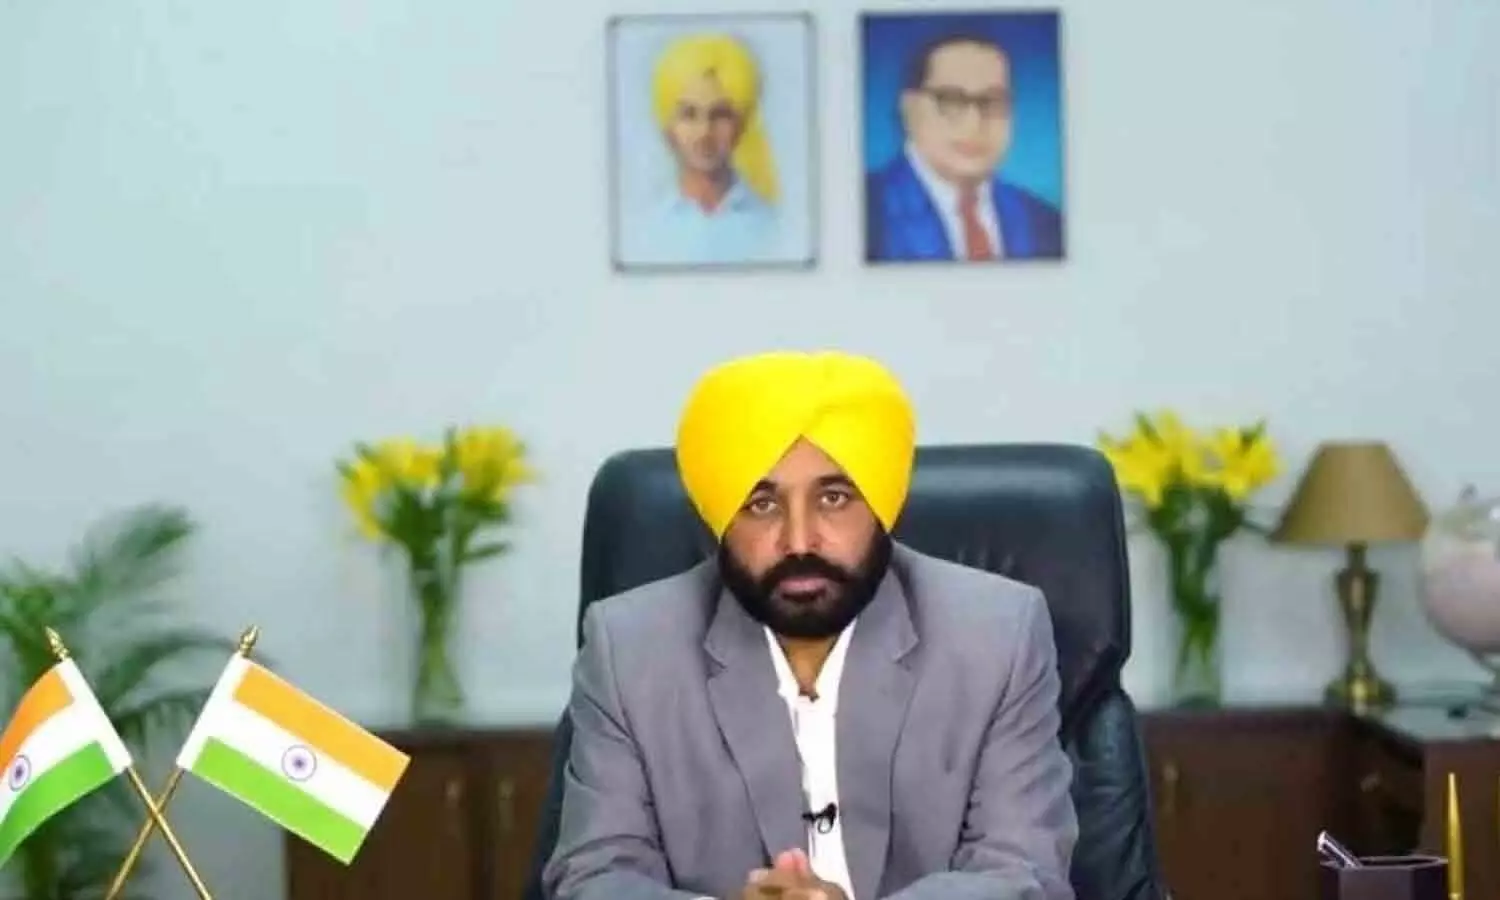 Punjab: As the date of Martyrs Day approaches, there is a ruckus in Punjab, ruckus started over Bhagat Singhs yellow turban